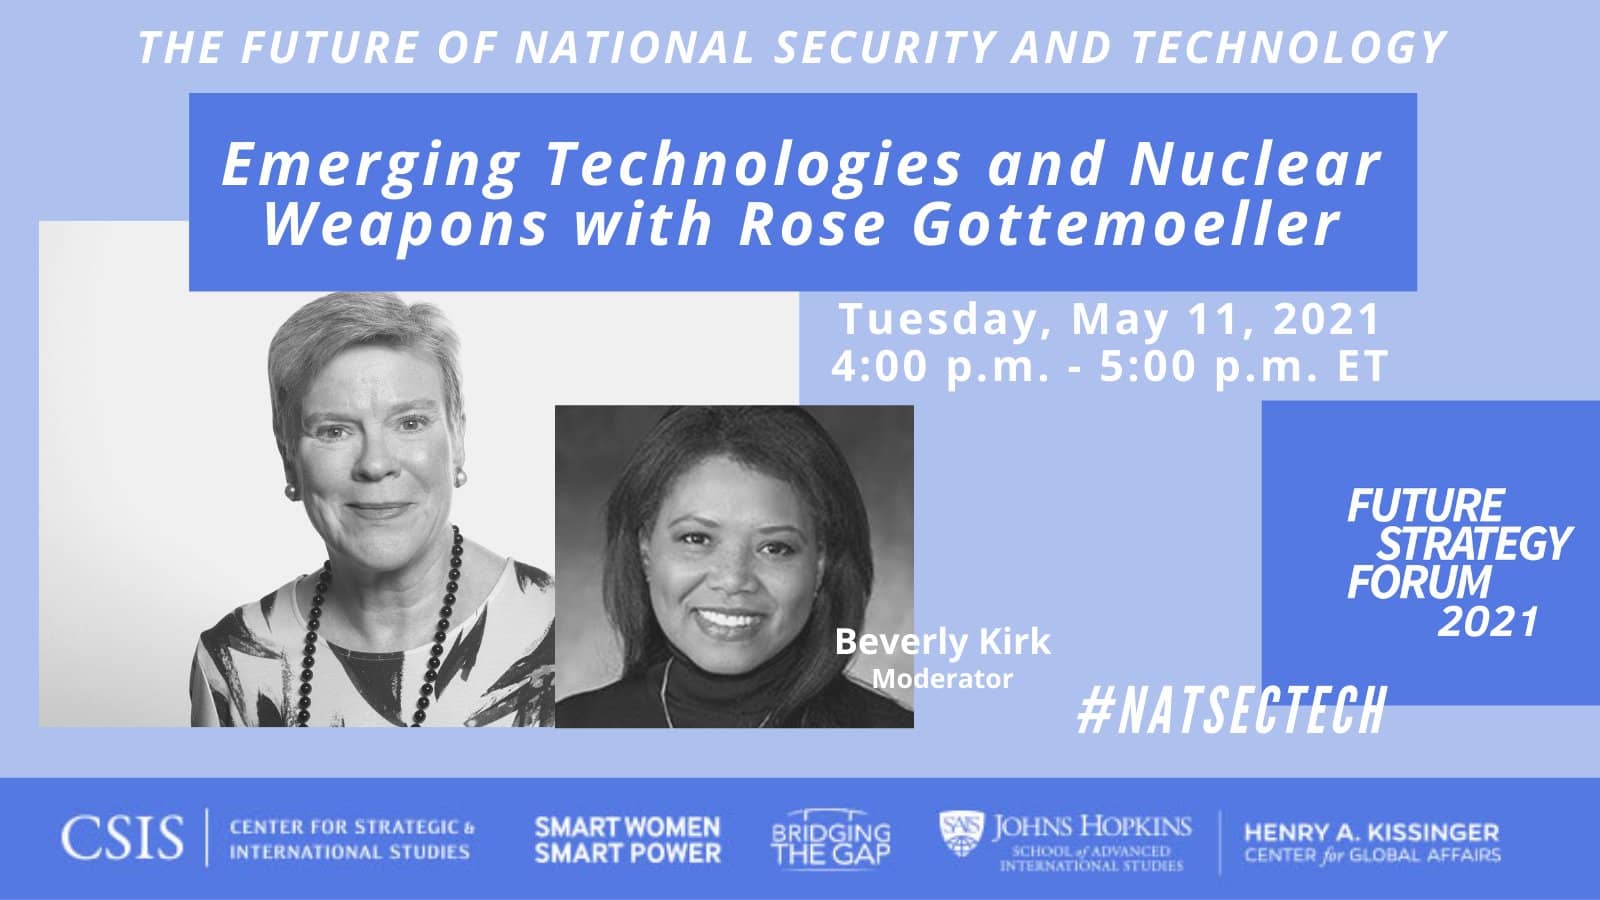 The Future of National Security and Technology. Emerging Technologies and Nuclear Weapons with Rose Gottemoeller. Tuesday, May 11, 2021. 4:00 p.m. - 5:00 p.m. ET. Beverly Kirk Moderator. Future Strategy Forum 2021. #NATSEC.